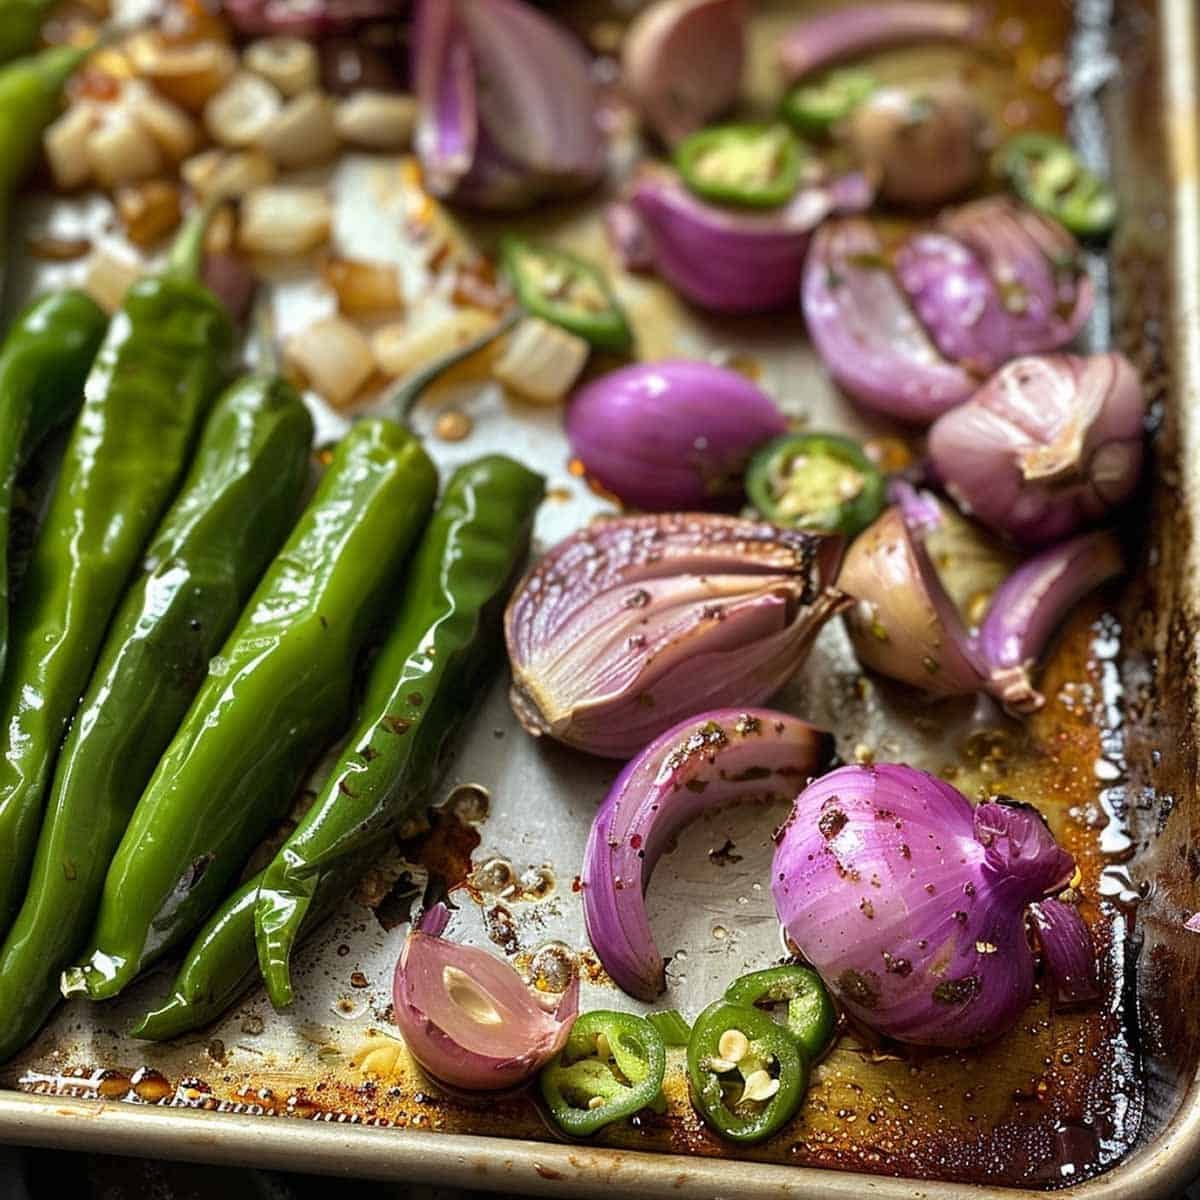 Garlic, peppers, and shallots roasting in a pan